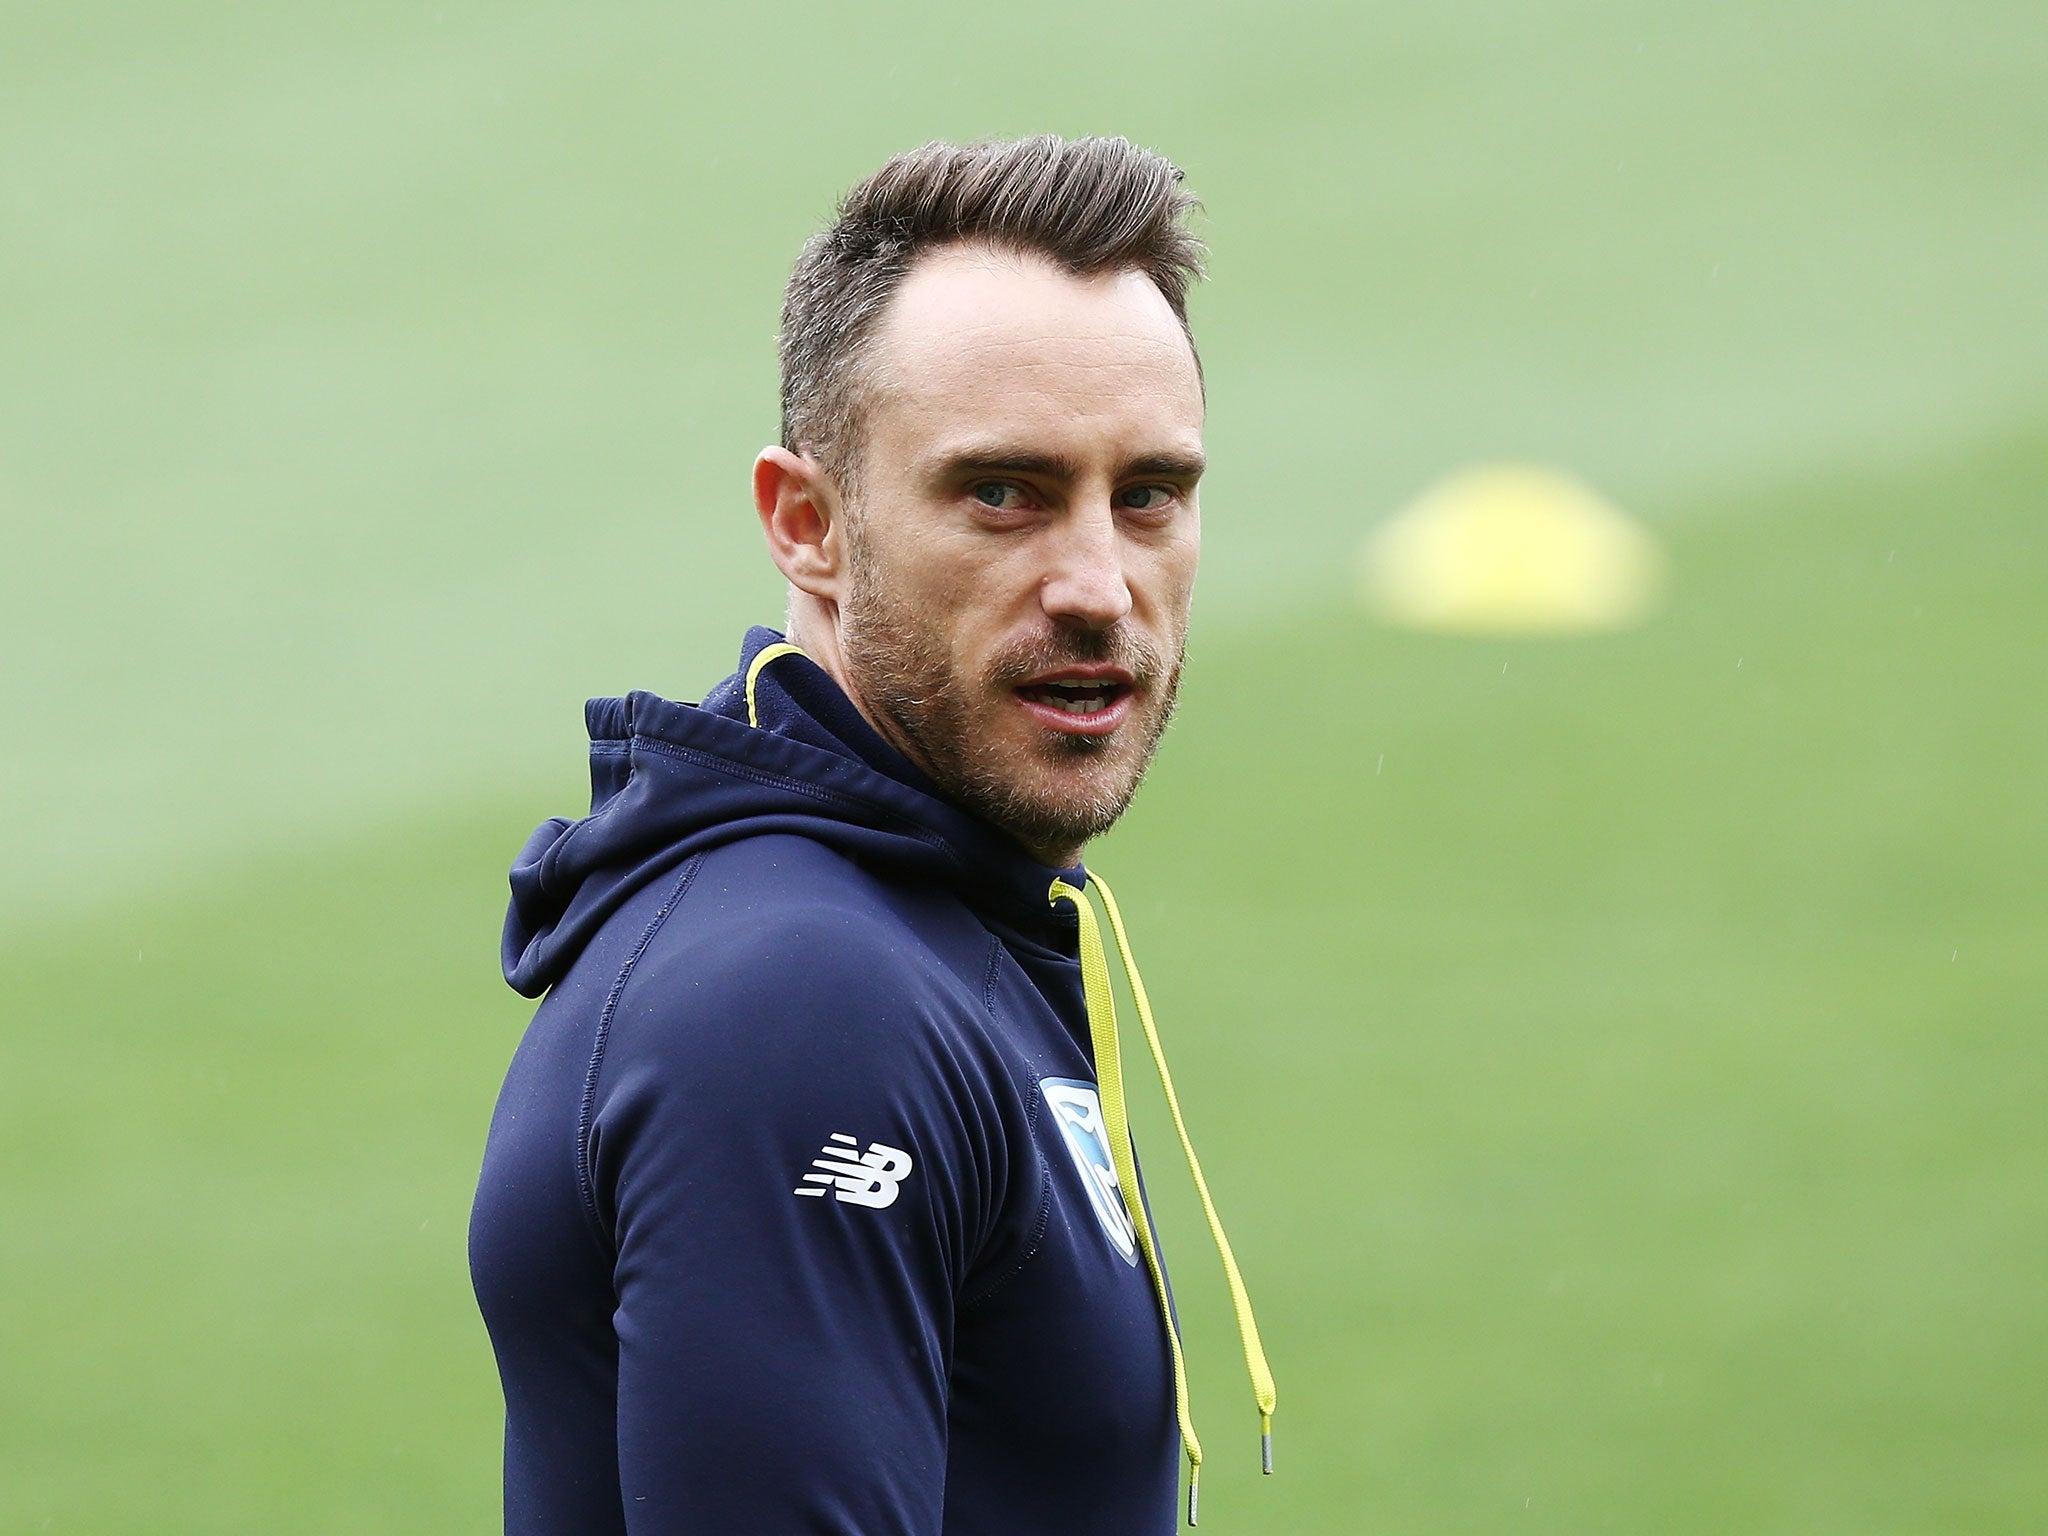 Faf Du Plessis 'completely Disagrees' With Ball Tampering Charge